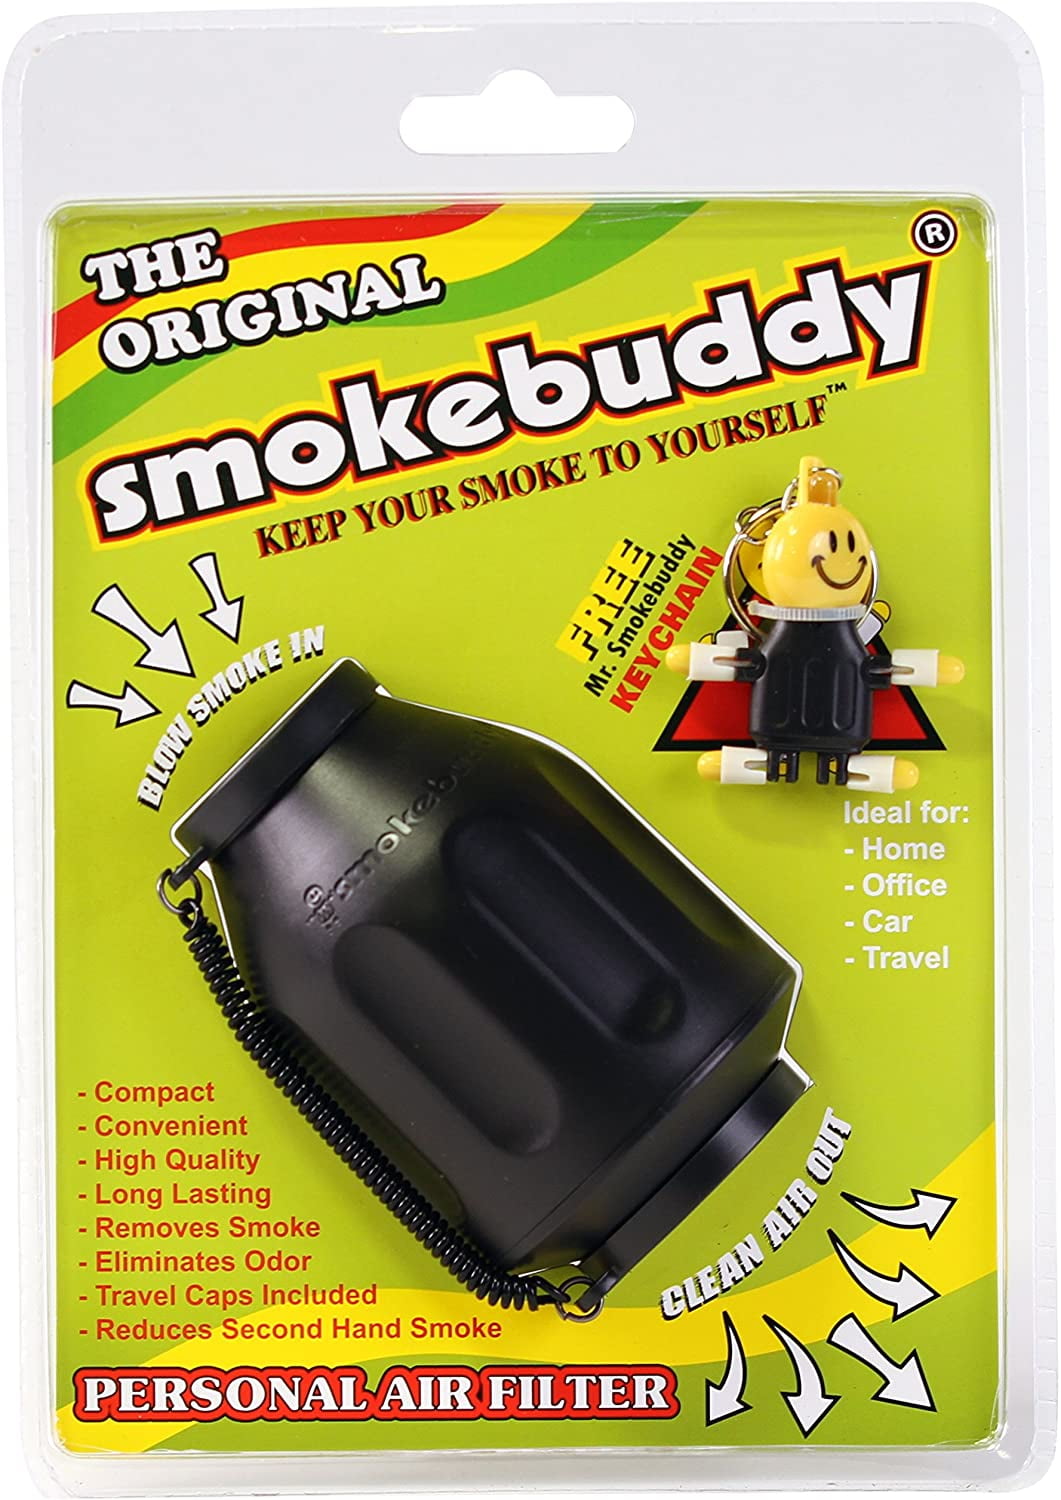 Smoke Buddy Personal Air Purifier Cleaner Filter Removes Odor Wood